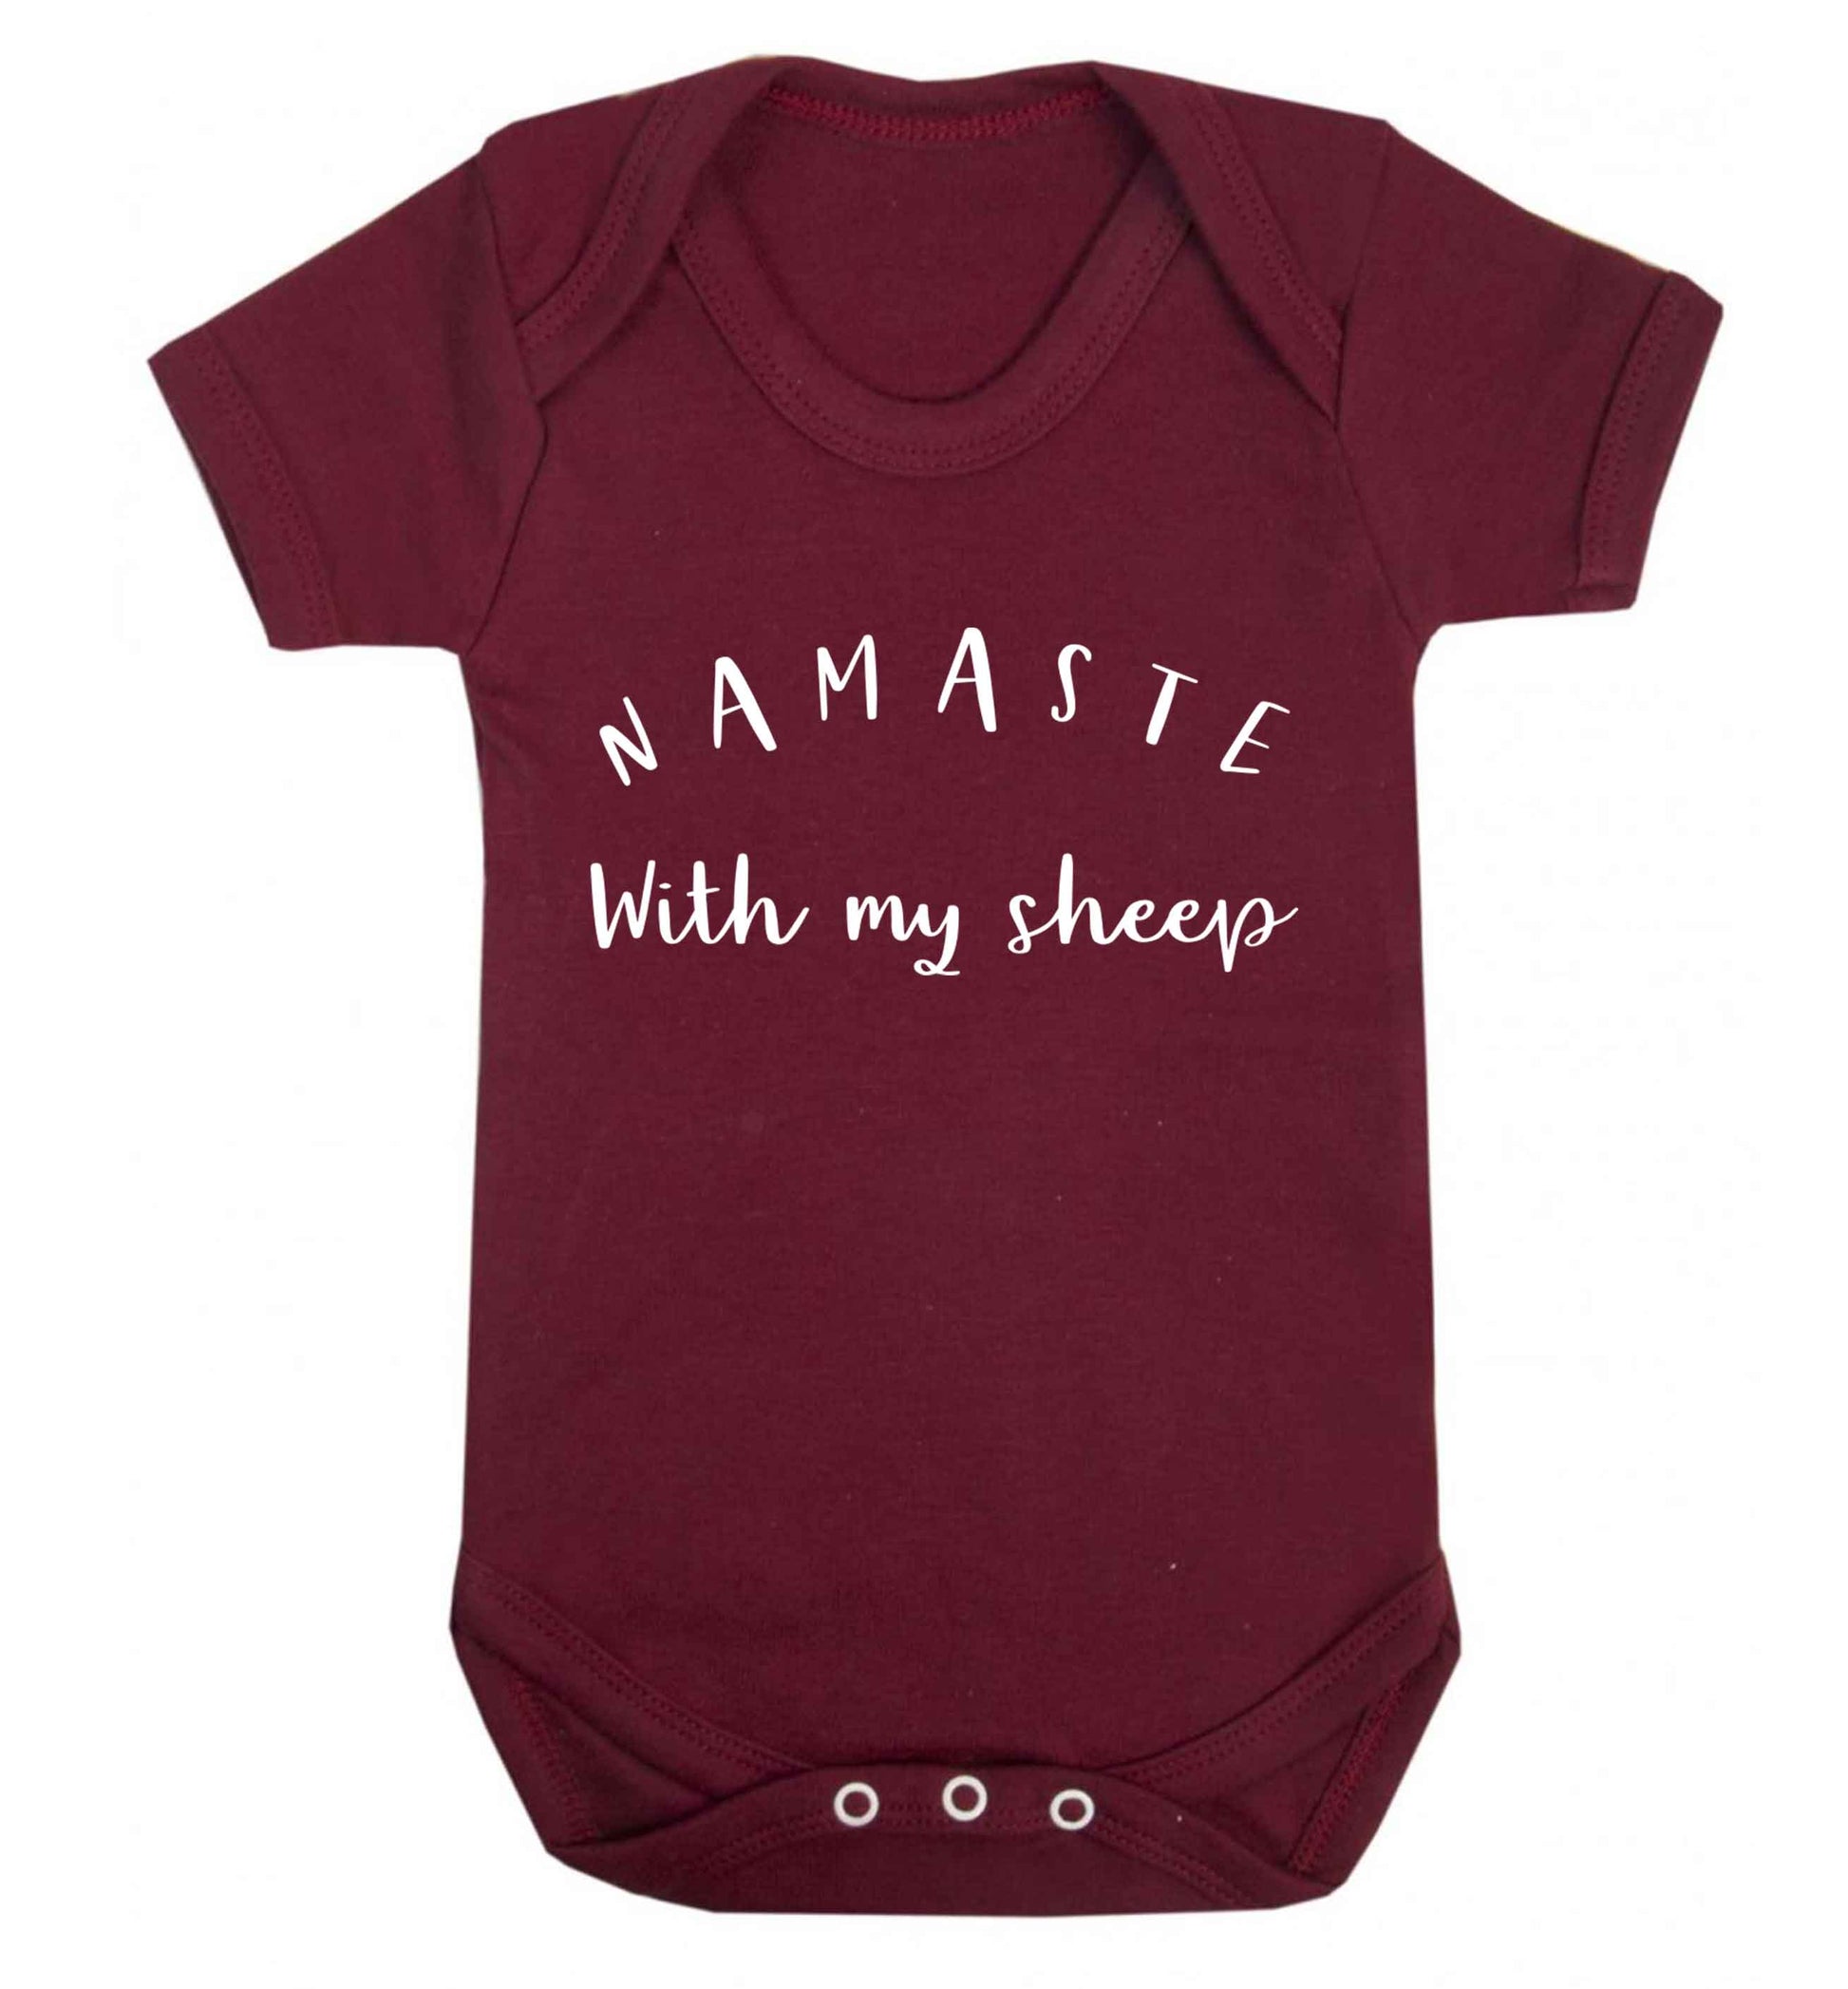 Namaste with my sheep Baby Vest maroon 18-24 months